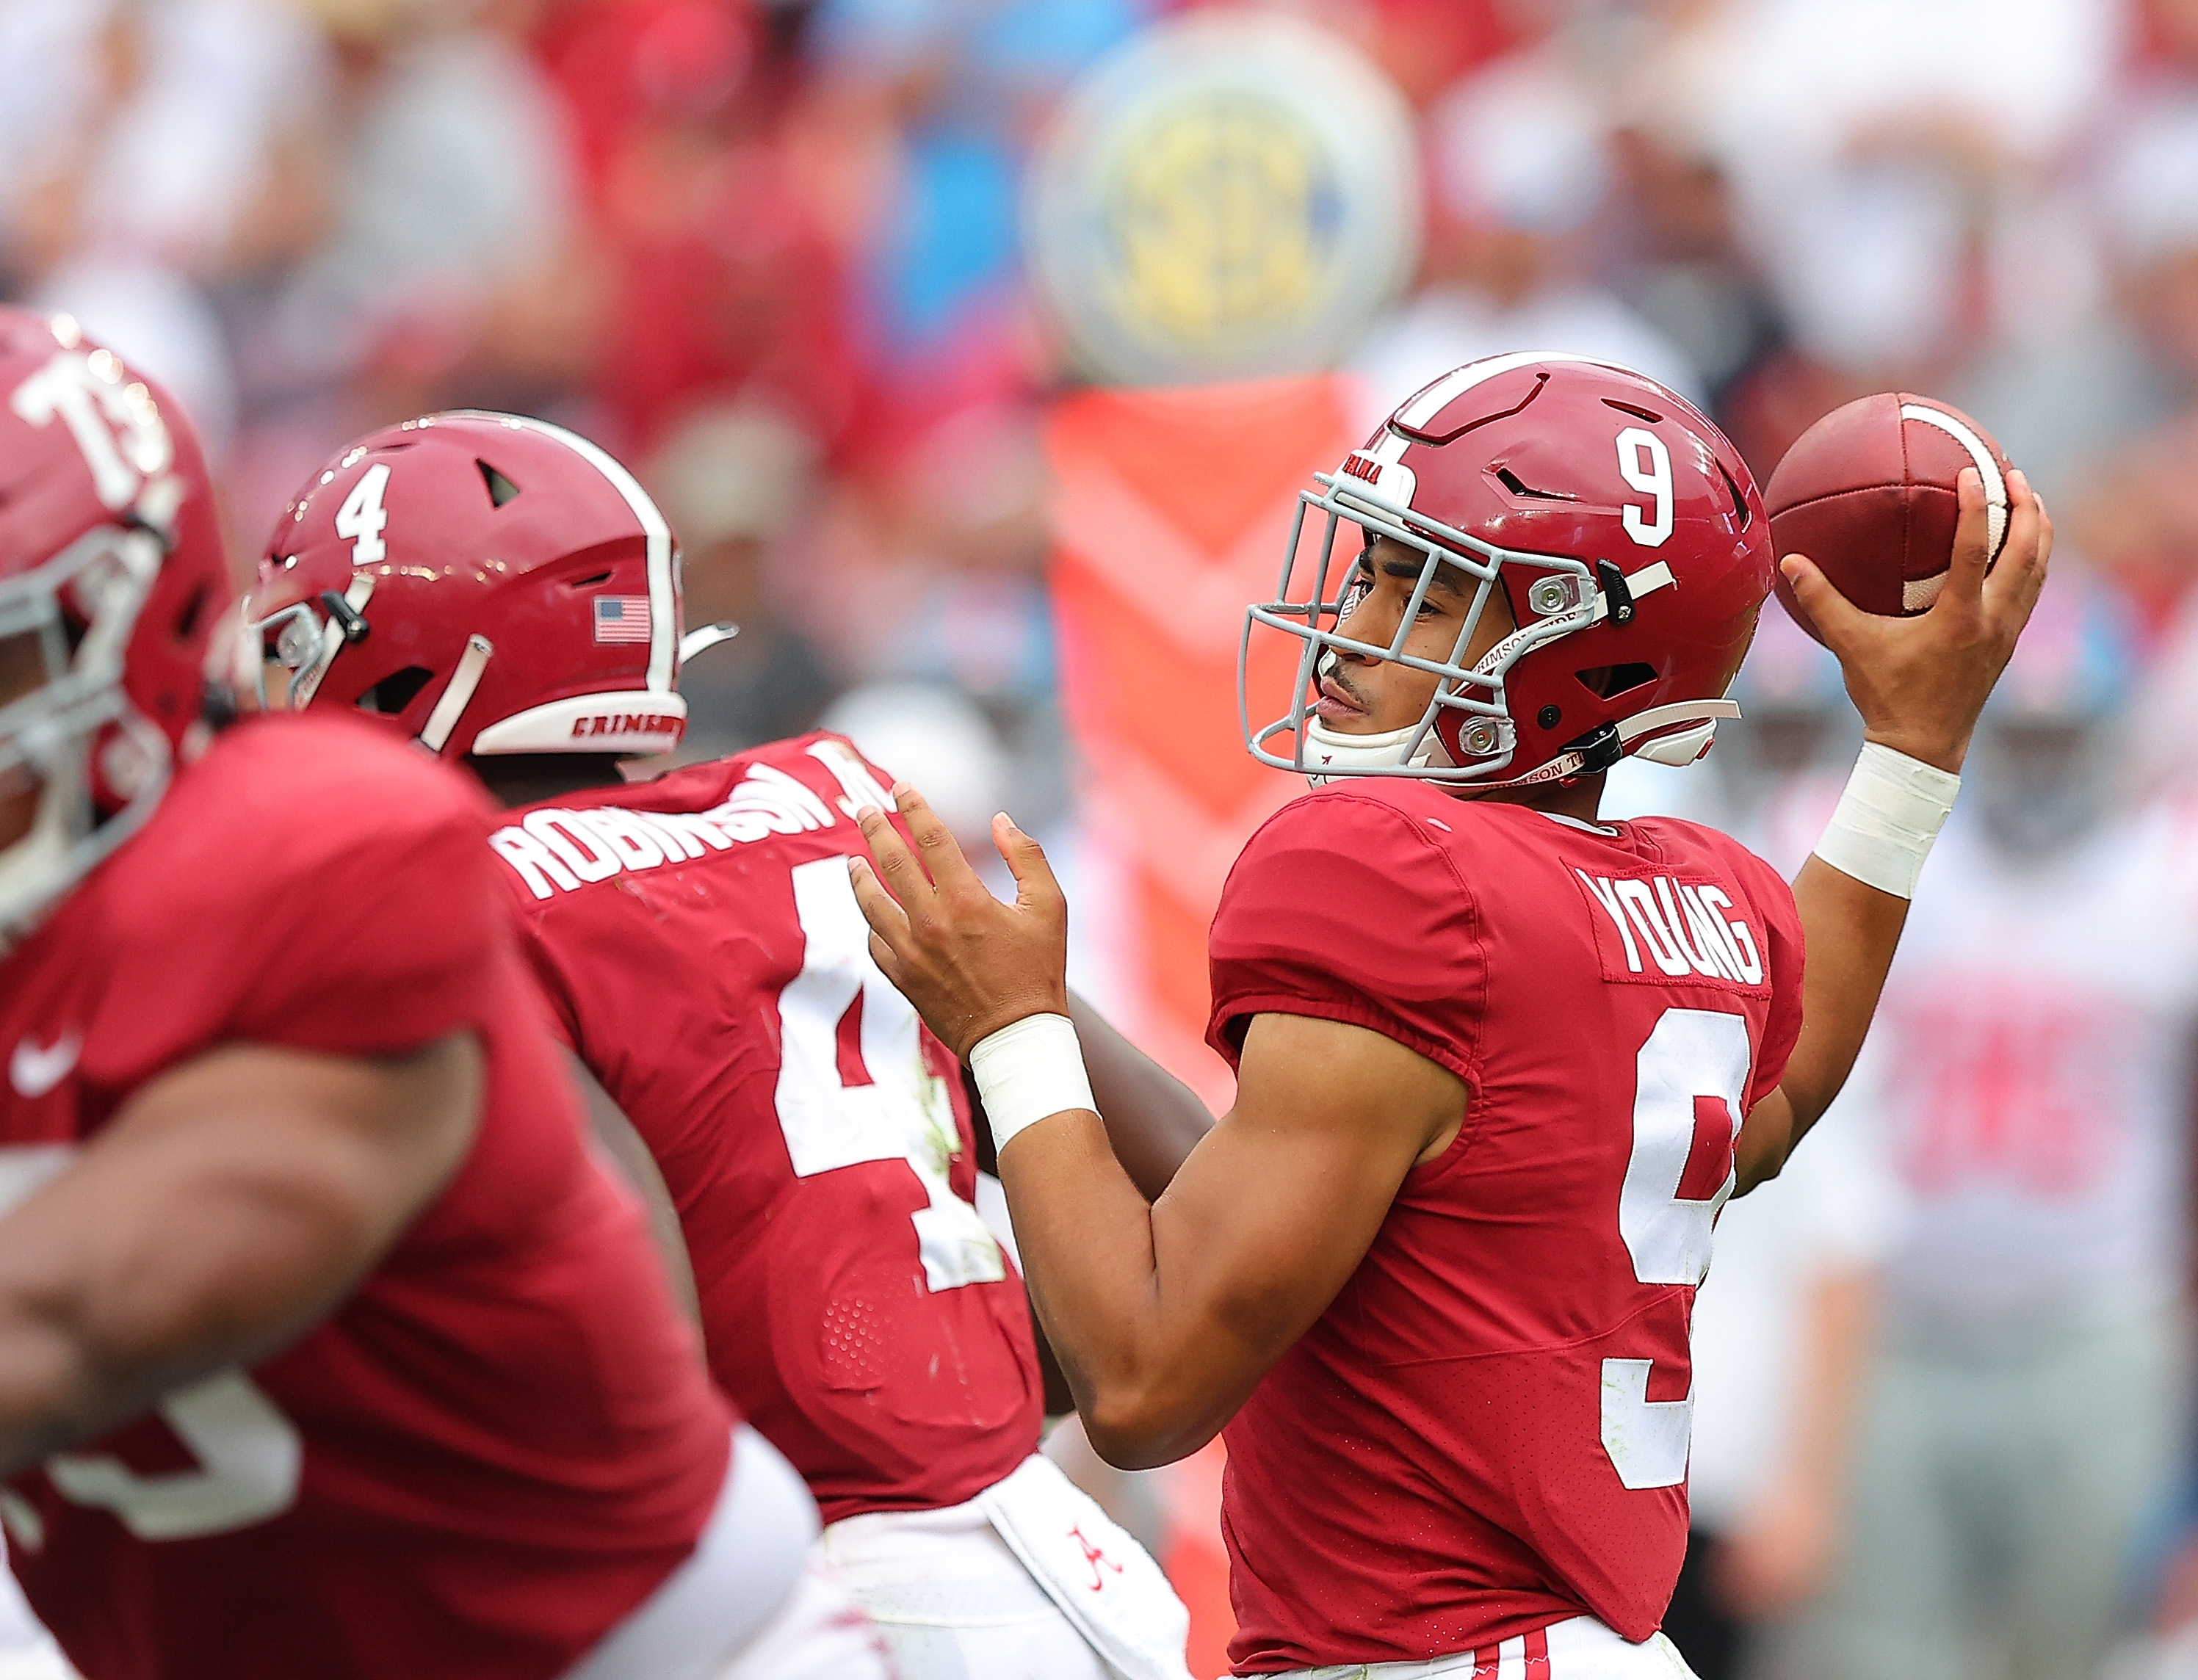 Alabama vs Texas A&M Point Spread, Over/Under, Moneyline and Betting Trends for College Football Week 6 Game